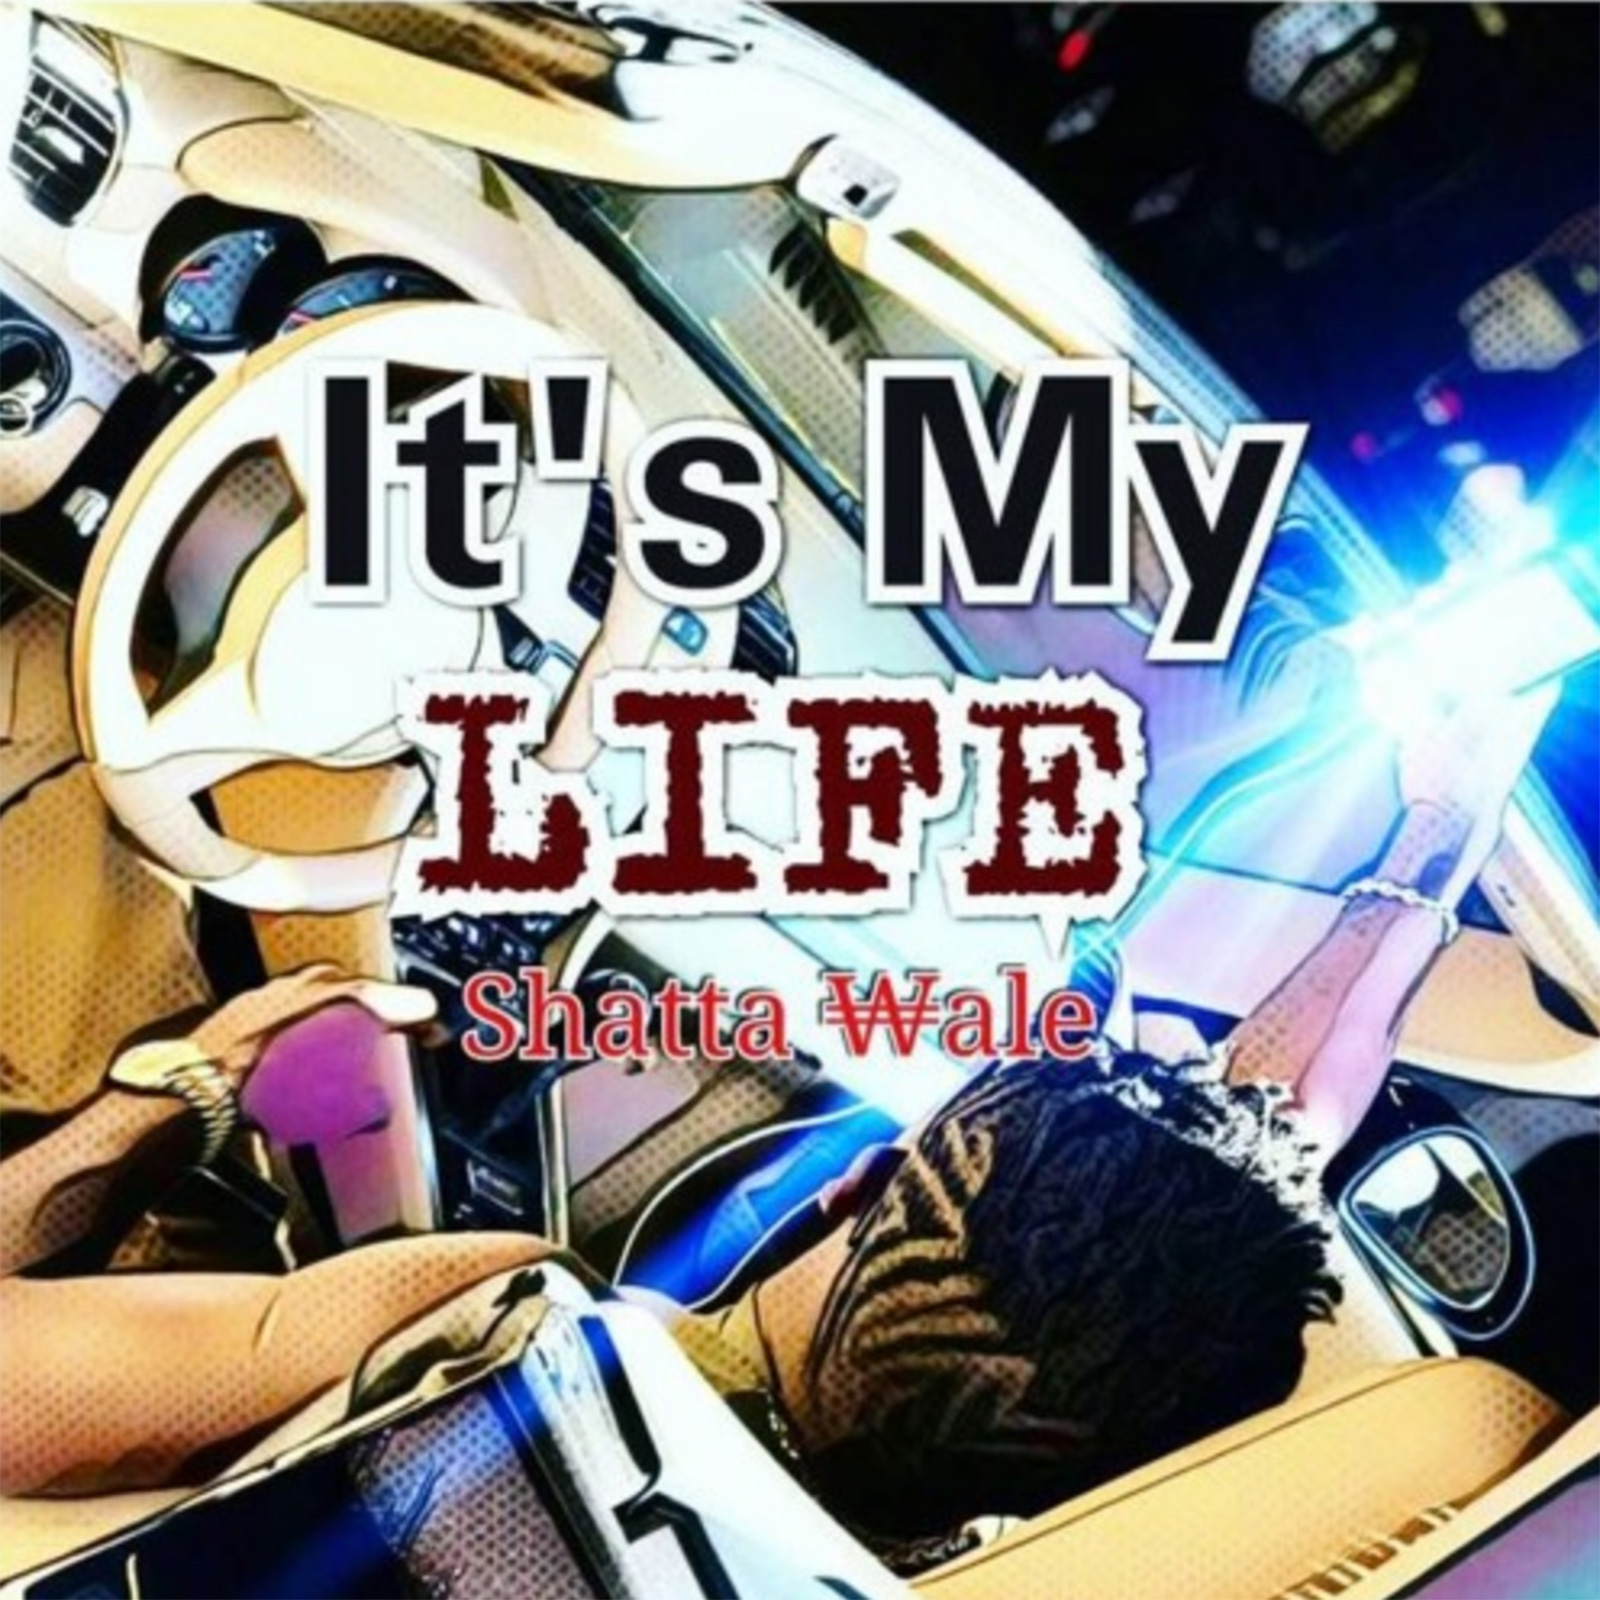 It's My Life (Sarkodie Diss) by Shatta Wale feat. Sarkodie